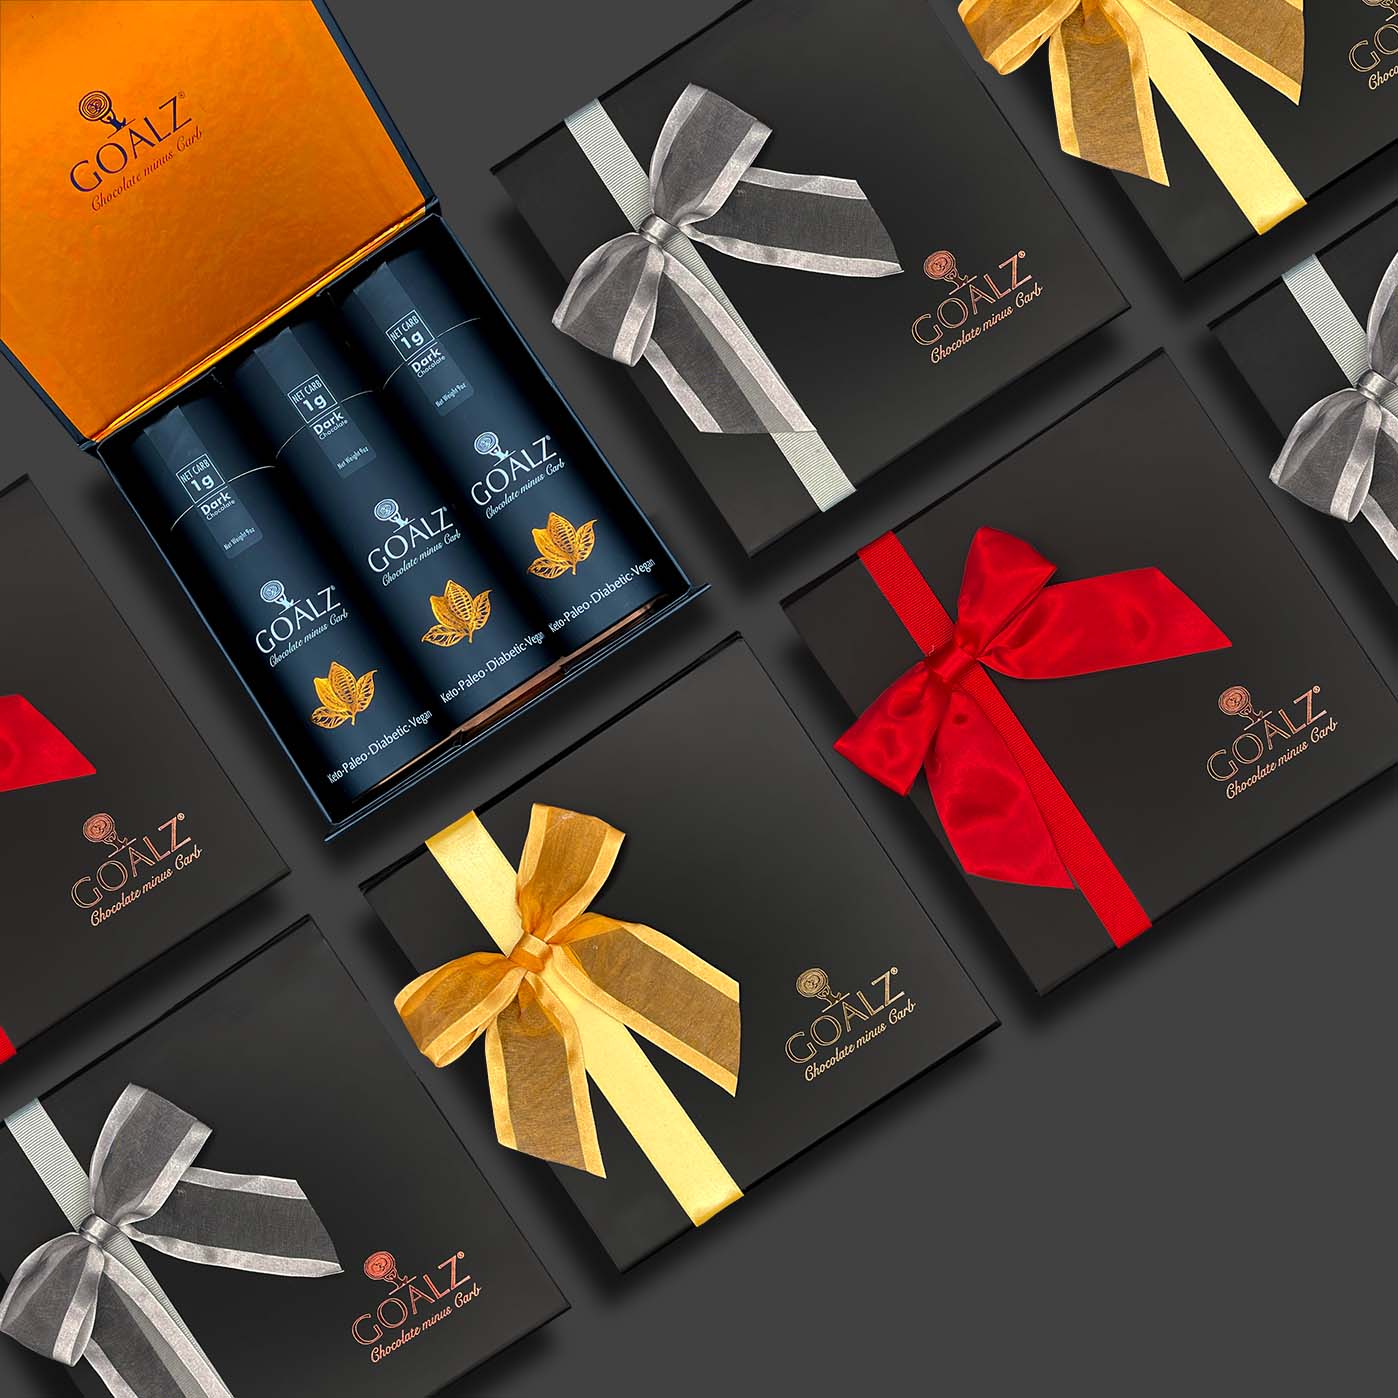 Sugar-Free Chocolate Gift Packs for low carb dieters, diabetics, and vegans. The custom gift boxes are designed for Mother's Day, Valentine's Day, and Christmas. Great gift idea for those who are in keto diet. Chocolates do not spike blood glucose level.